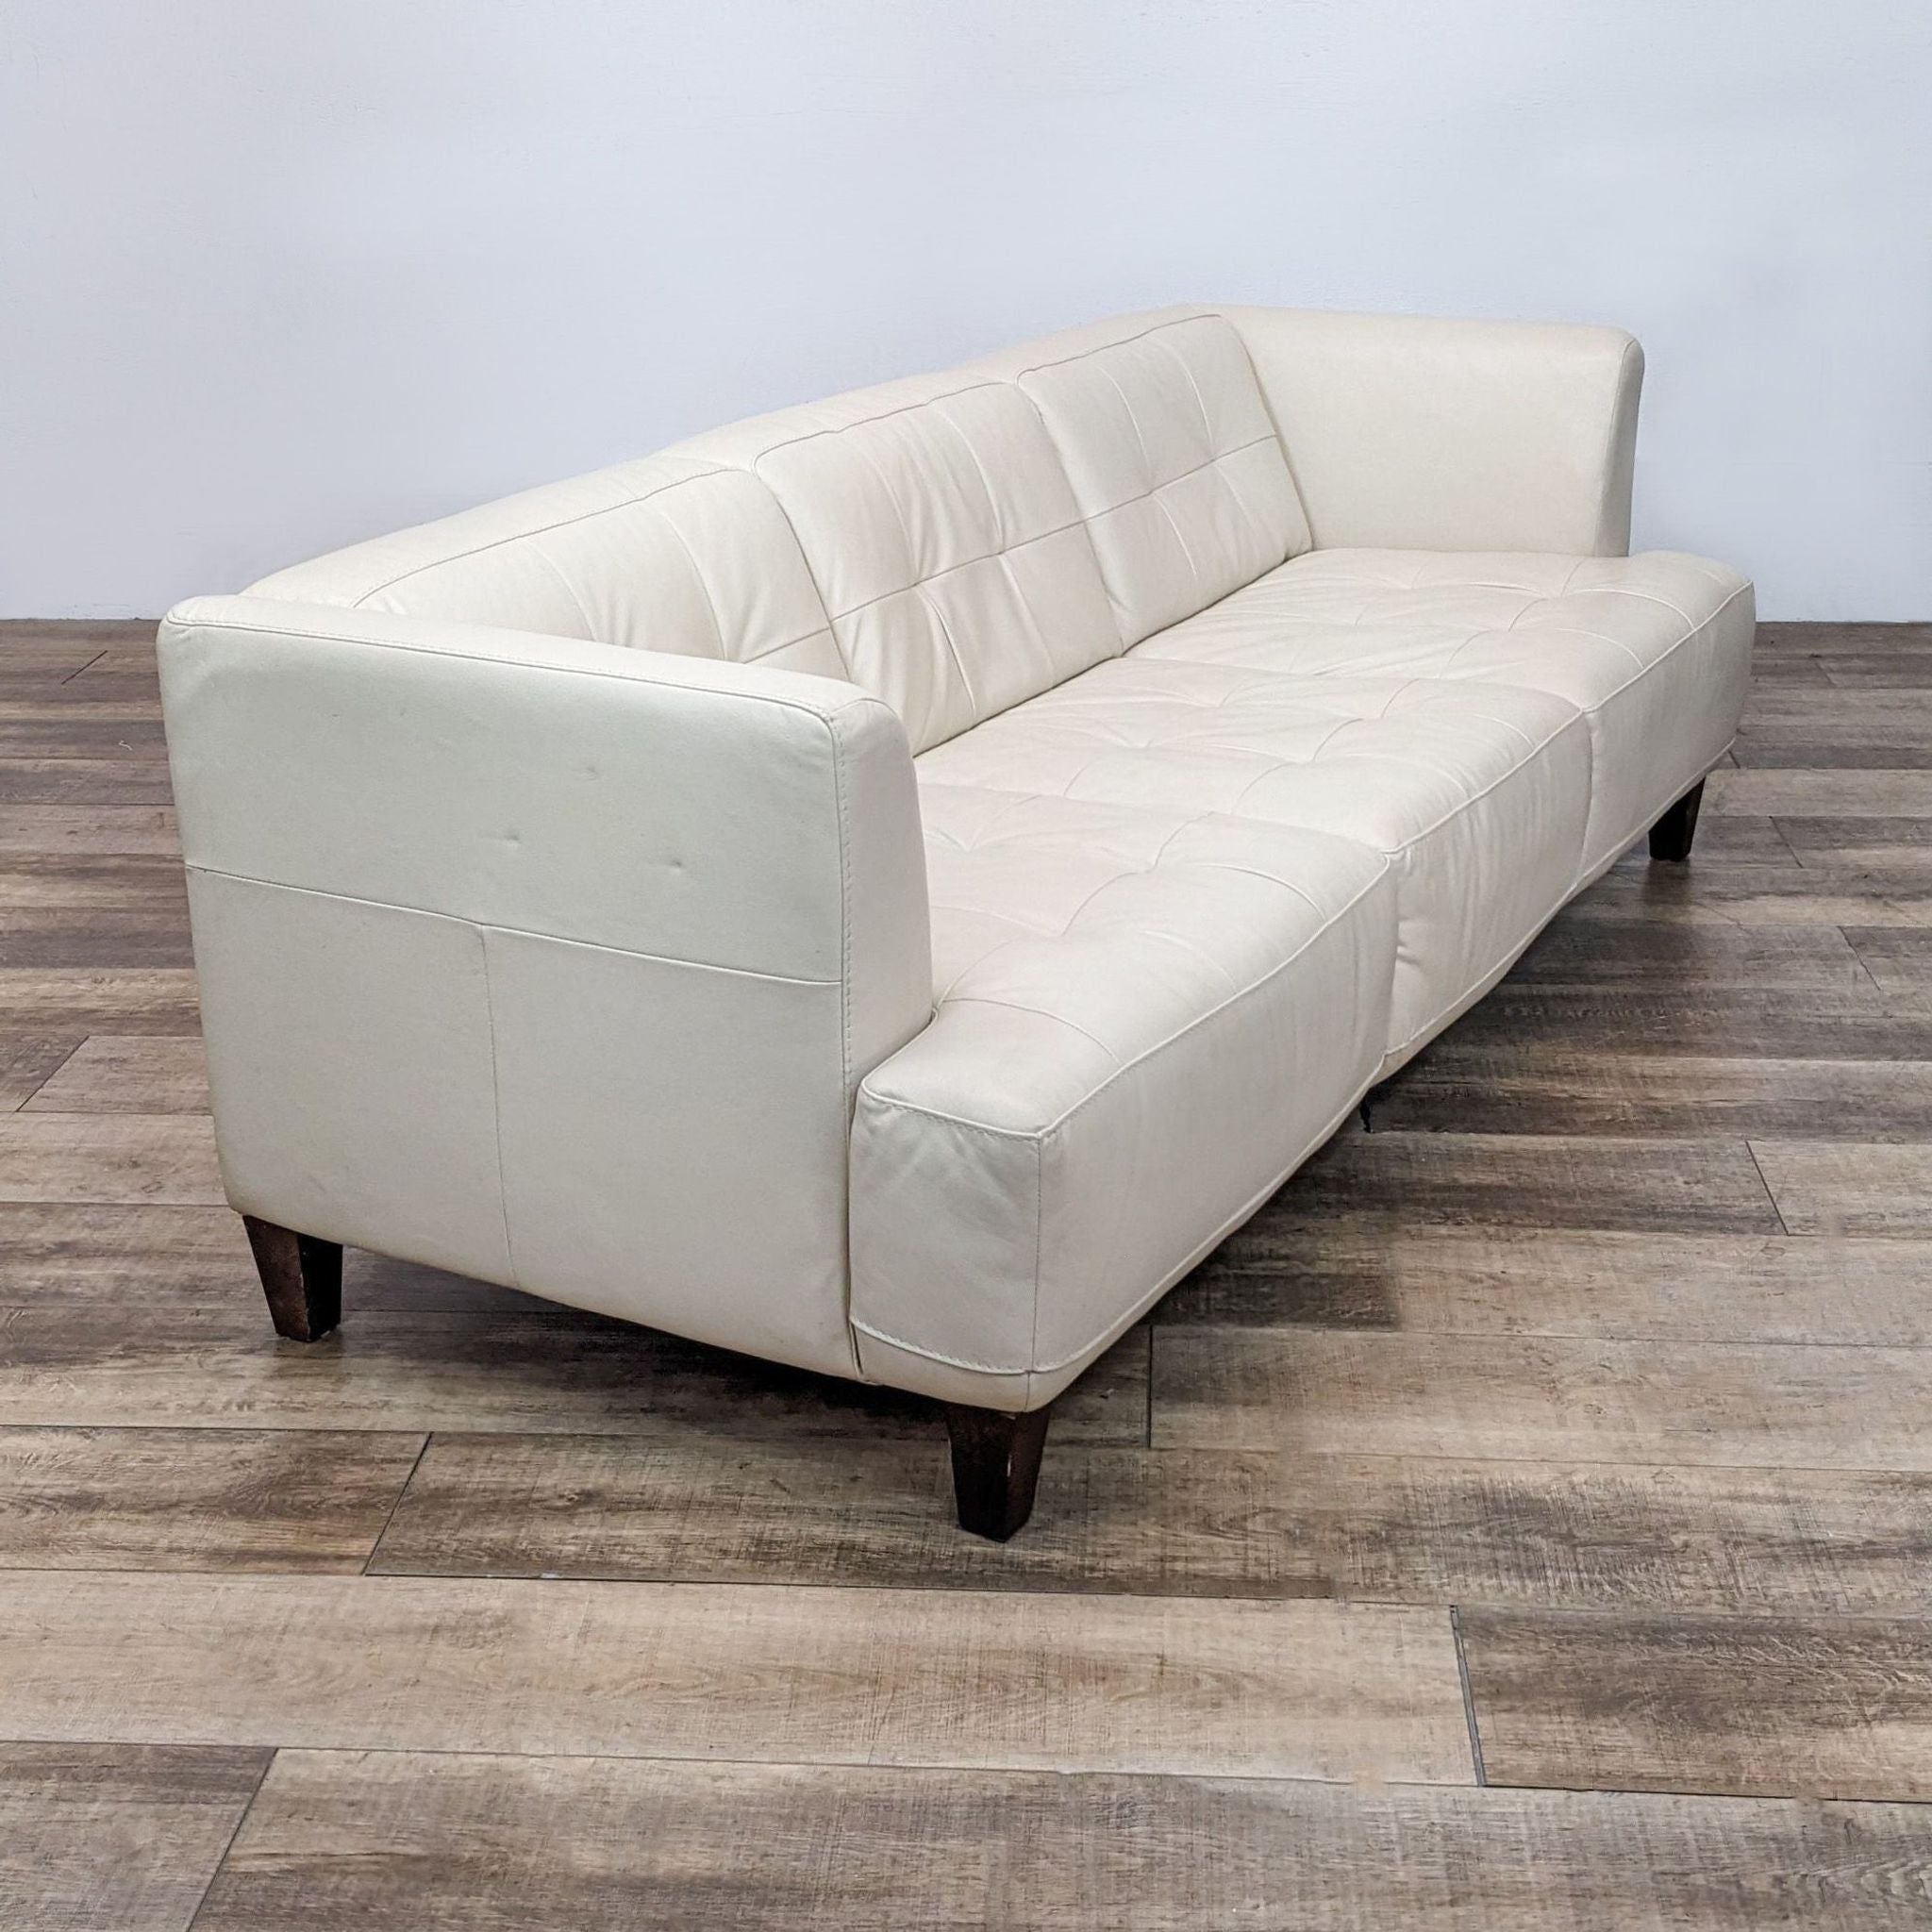 Angle view of Chateau d'Ax Italian 3-seat tufted leather sofa with dark finish legs and shelter arms.